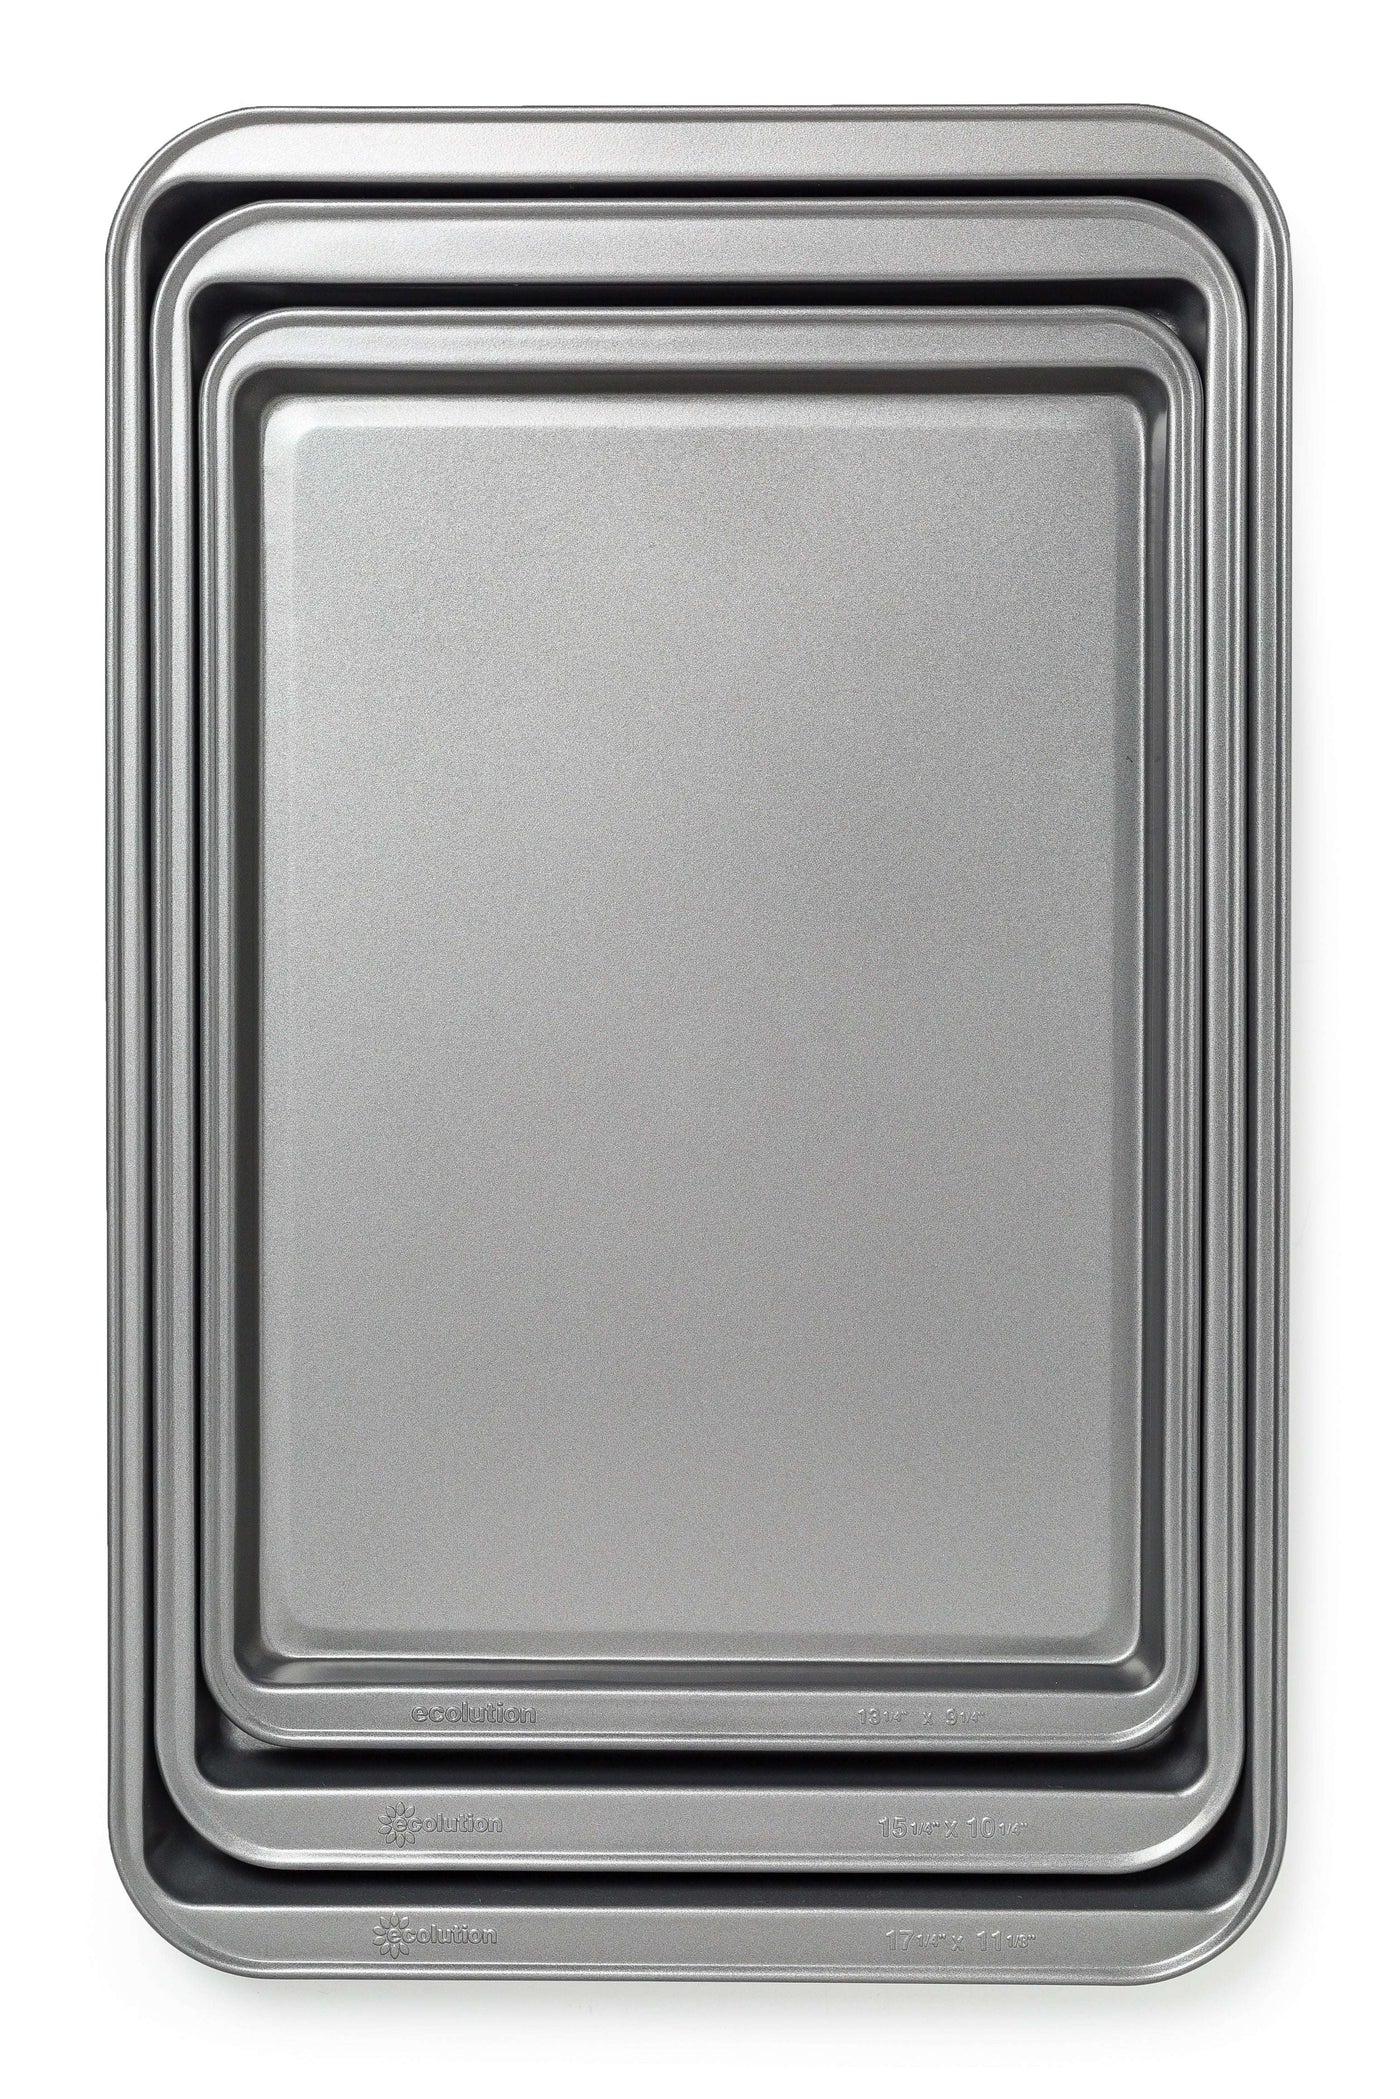 Good Cook 13'' x 9'' Non-stick Small Cookie Sheet, heavy duty steel, gray